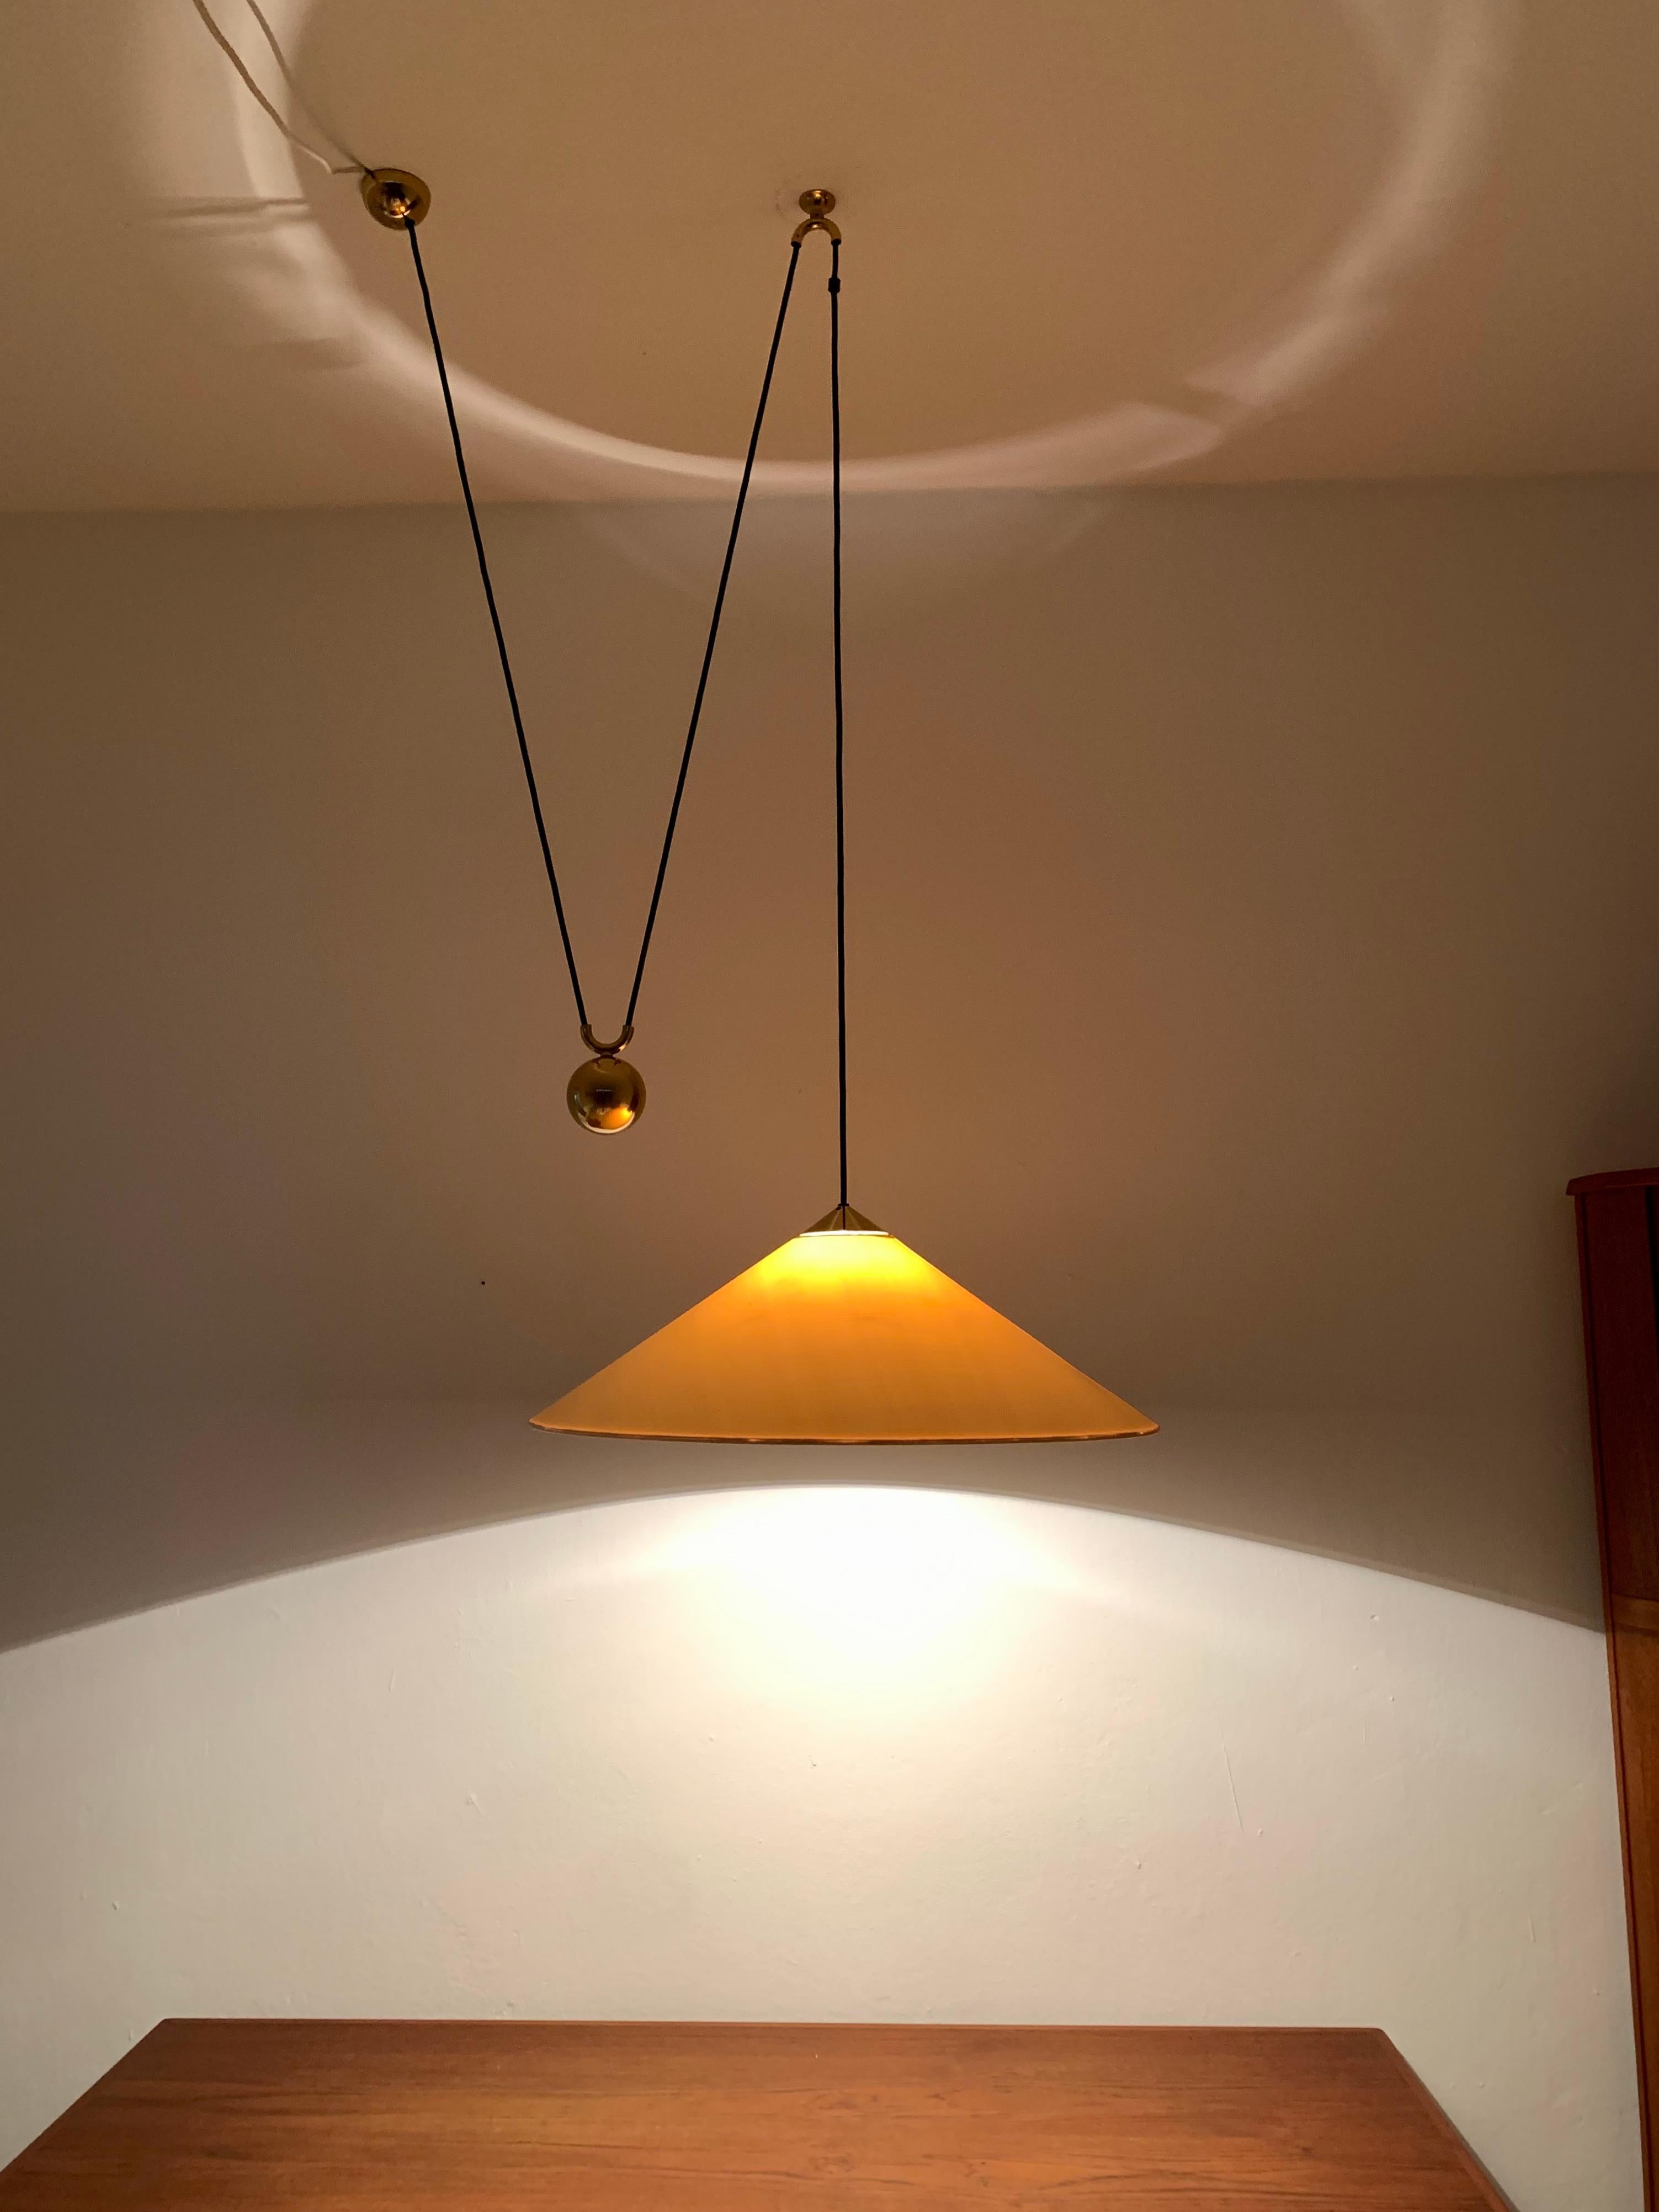 Adjustable Brass Pendant Lamp with Counterweight by Florian Schulz For Sale 3